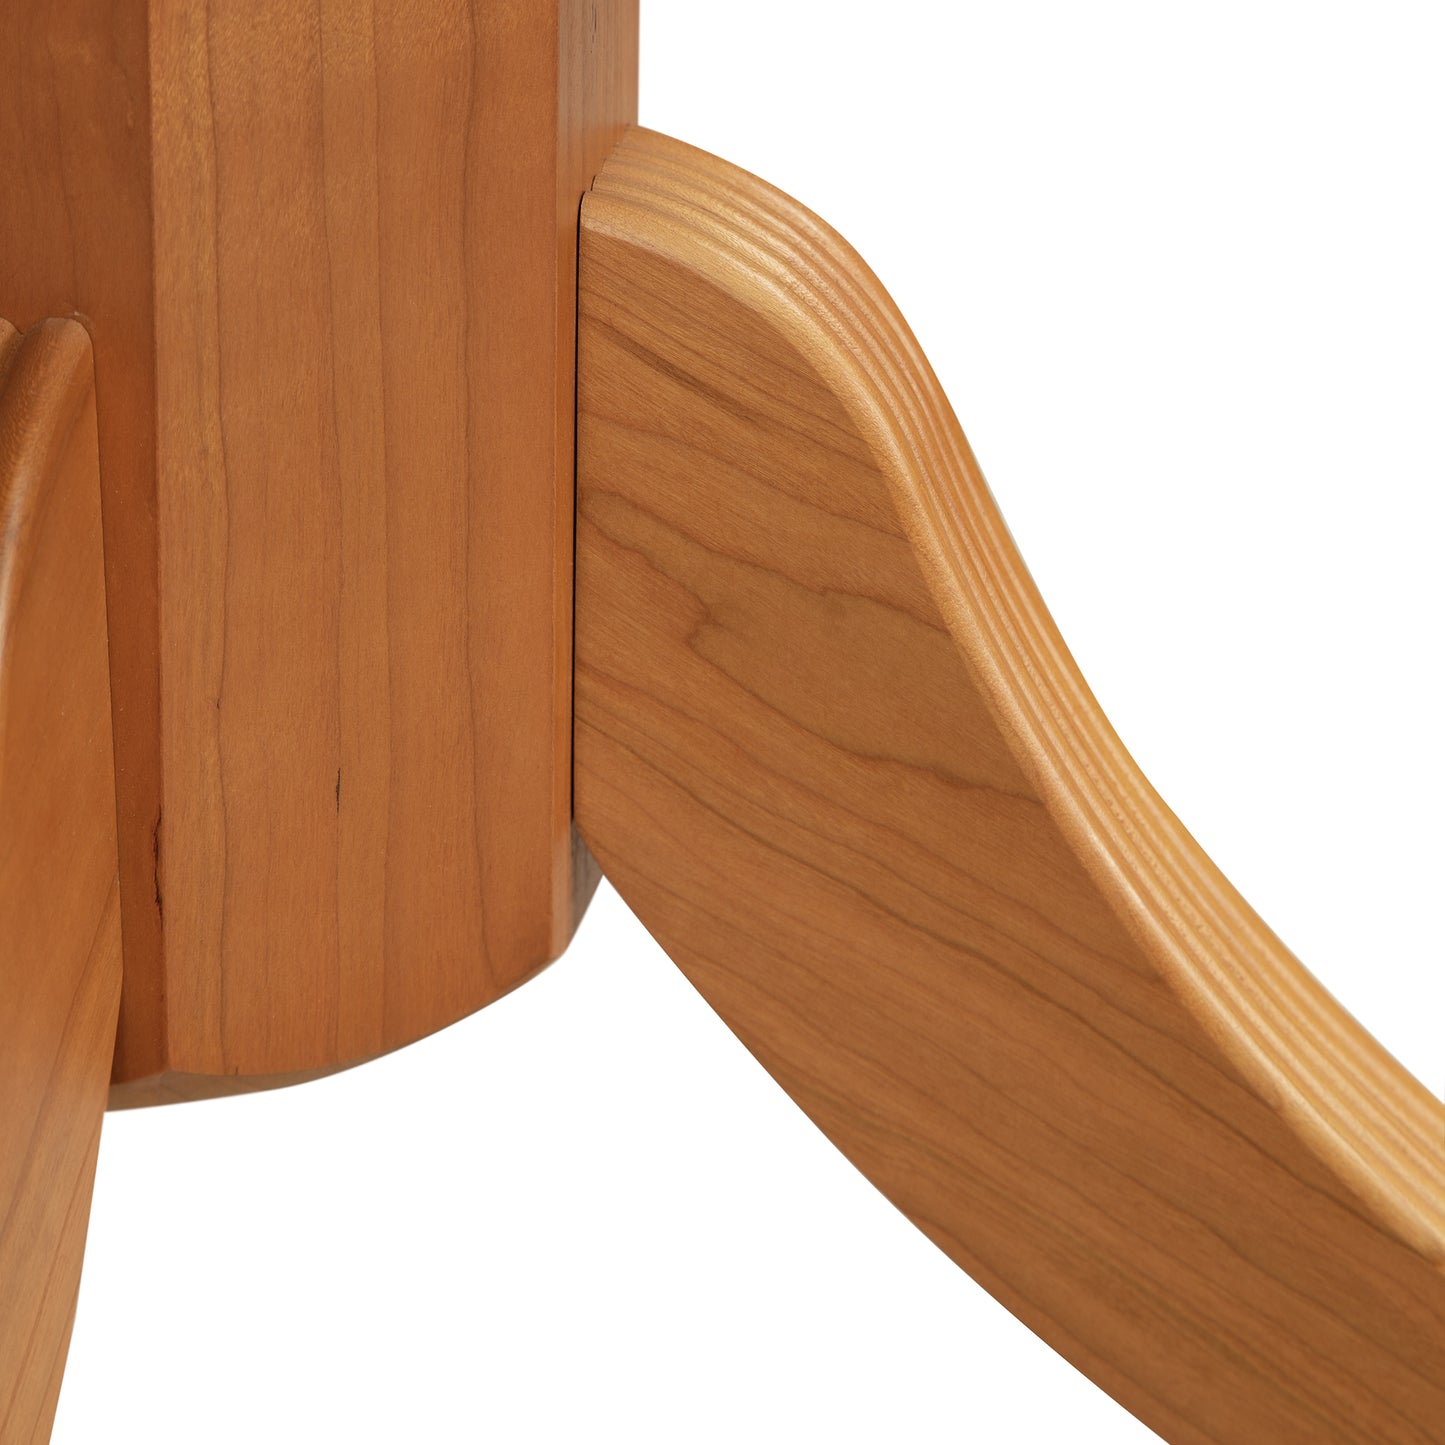 A close up of the legs of a Duncan-Phyfe Round Pedestal Dining Table by Lyndon Furniture.